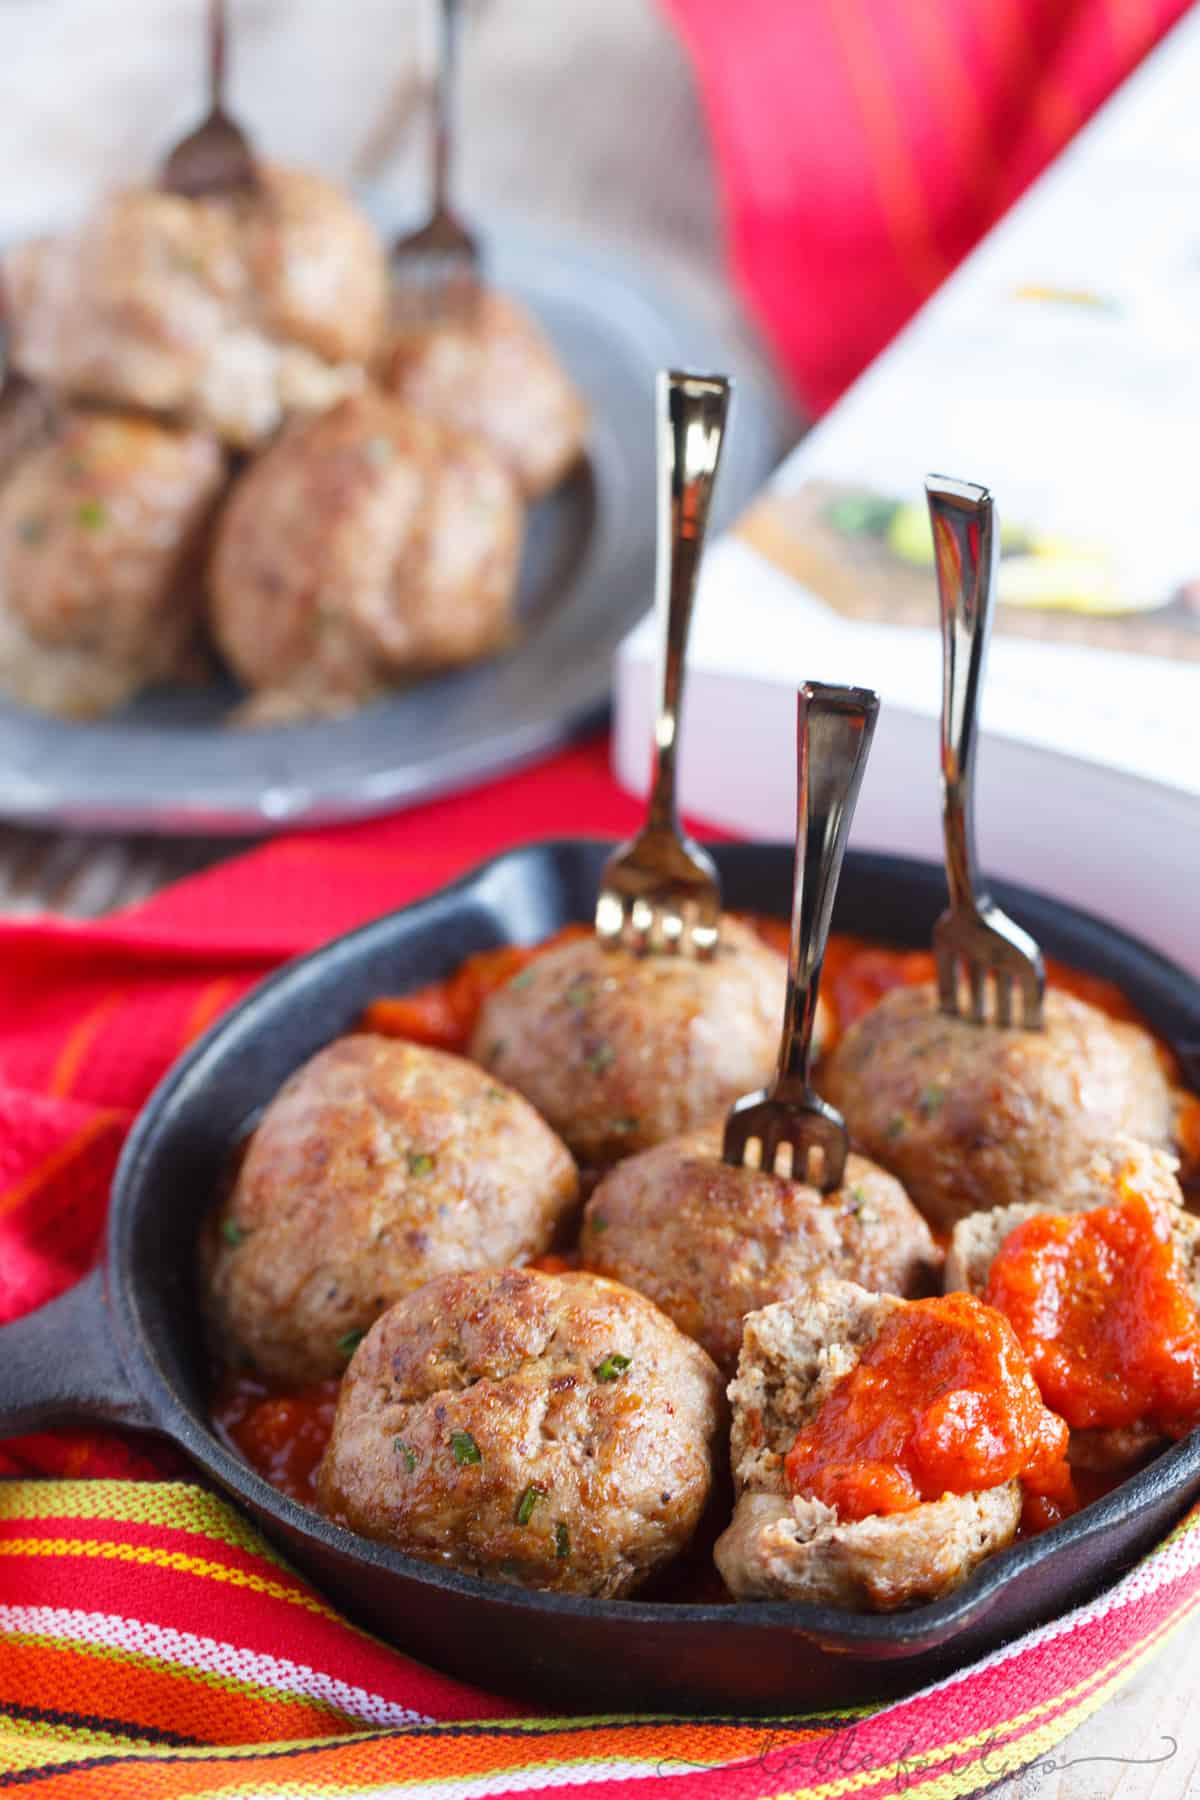 Mexican meatballs are a fun and inexpensive appetizer to throw together in a pinch! Super flavorful and fun little bites that can be served with salsa or guacamole!